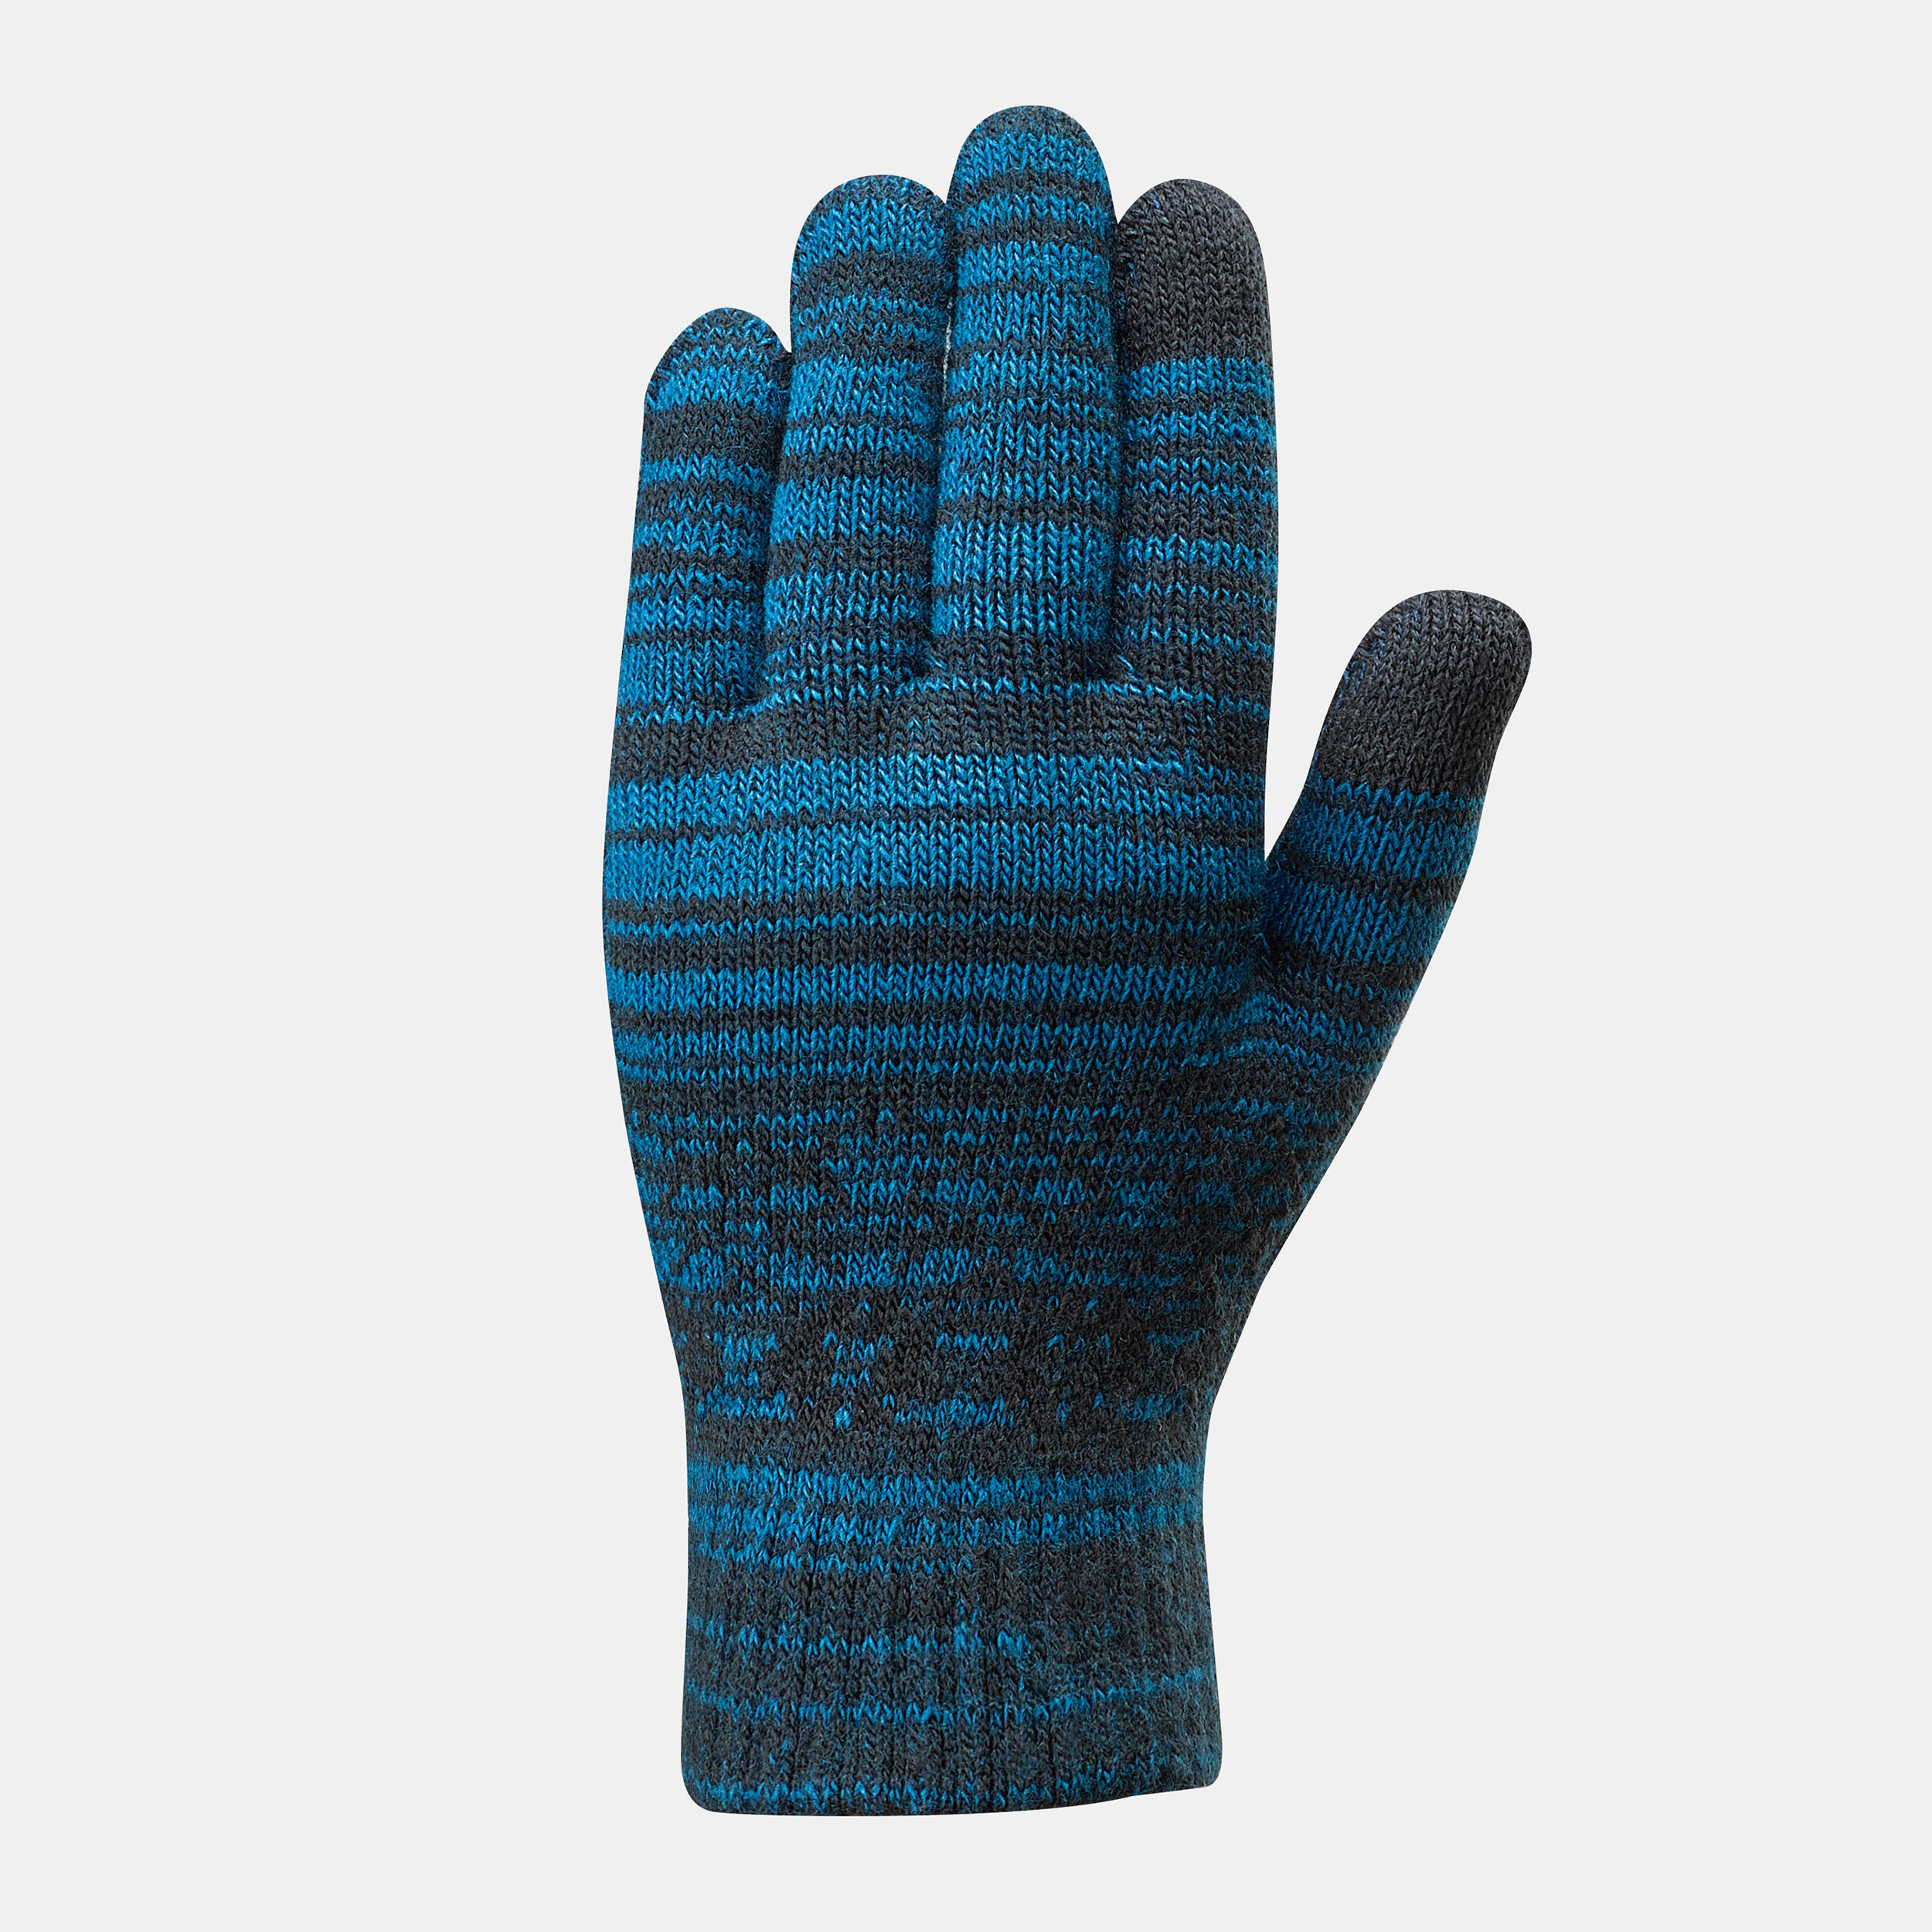 KIDS’ TOUCHSCREEN COMPATIBLE HIKING GLOVES - SH100 KNITTED - AGED 4-14 YEARS 3/3